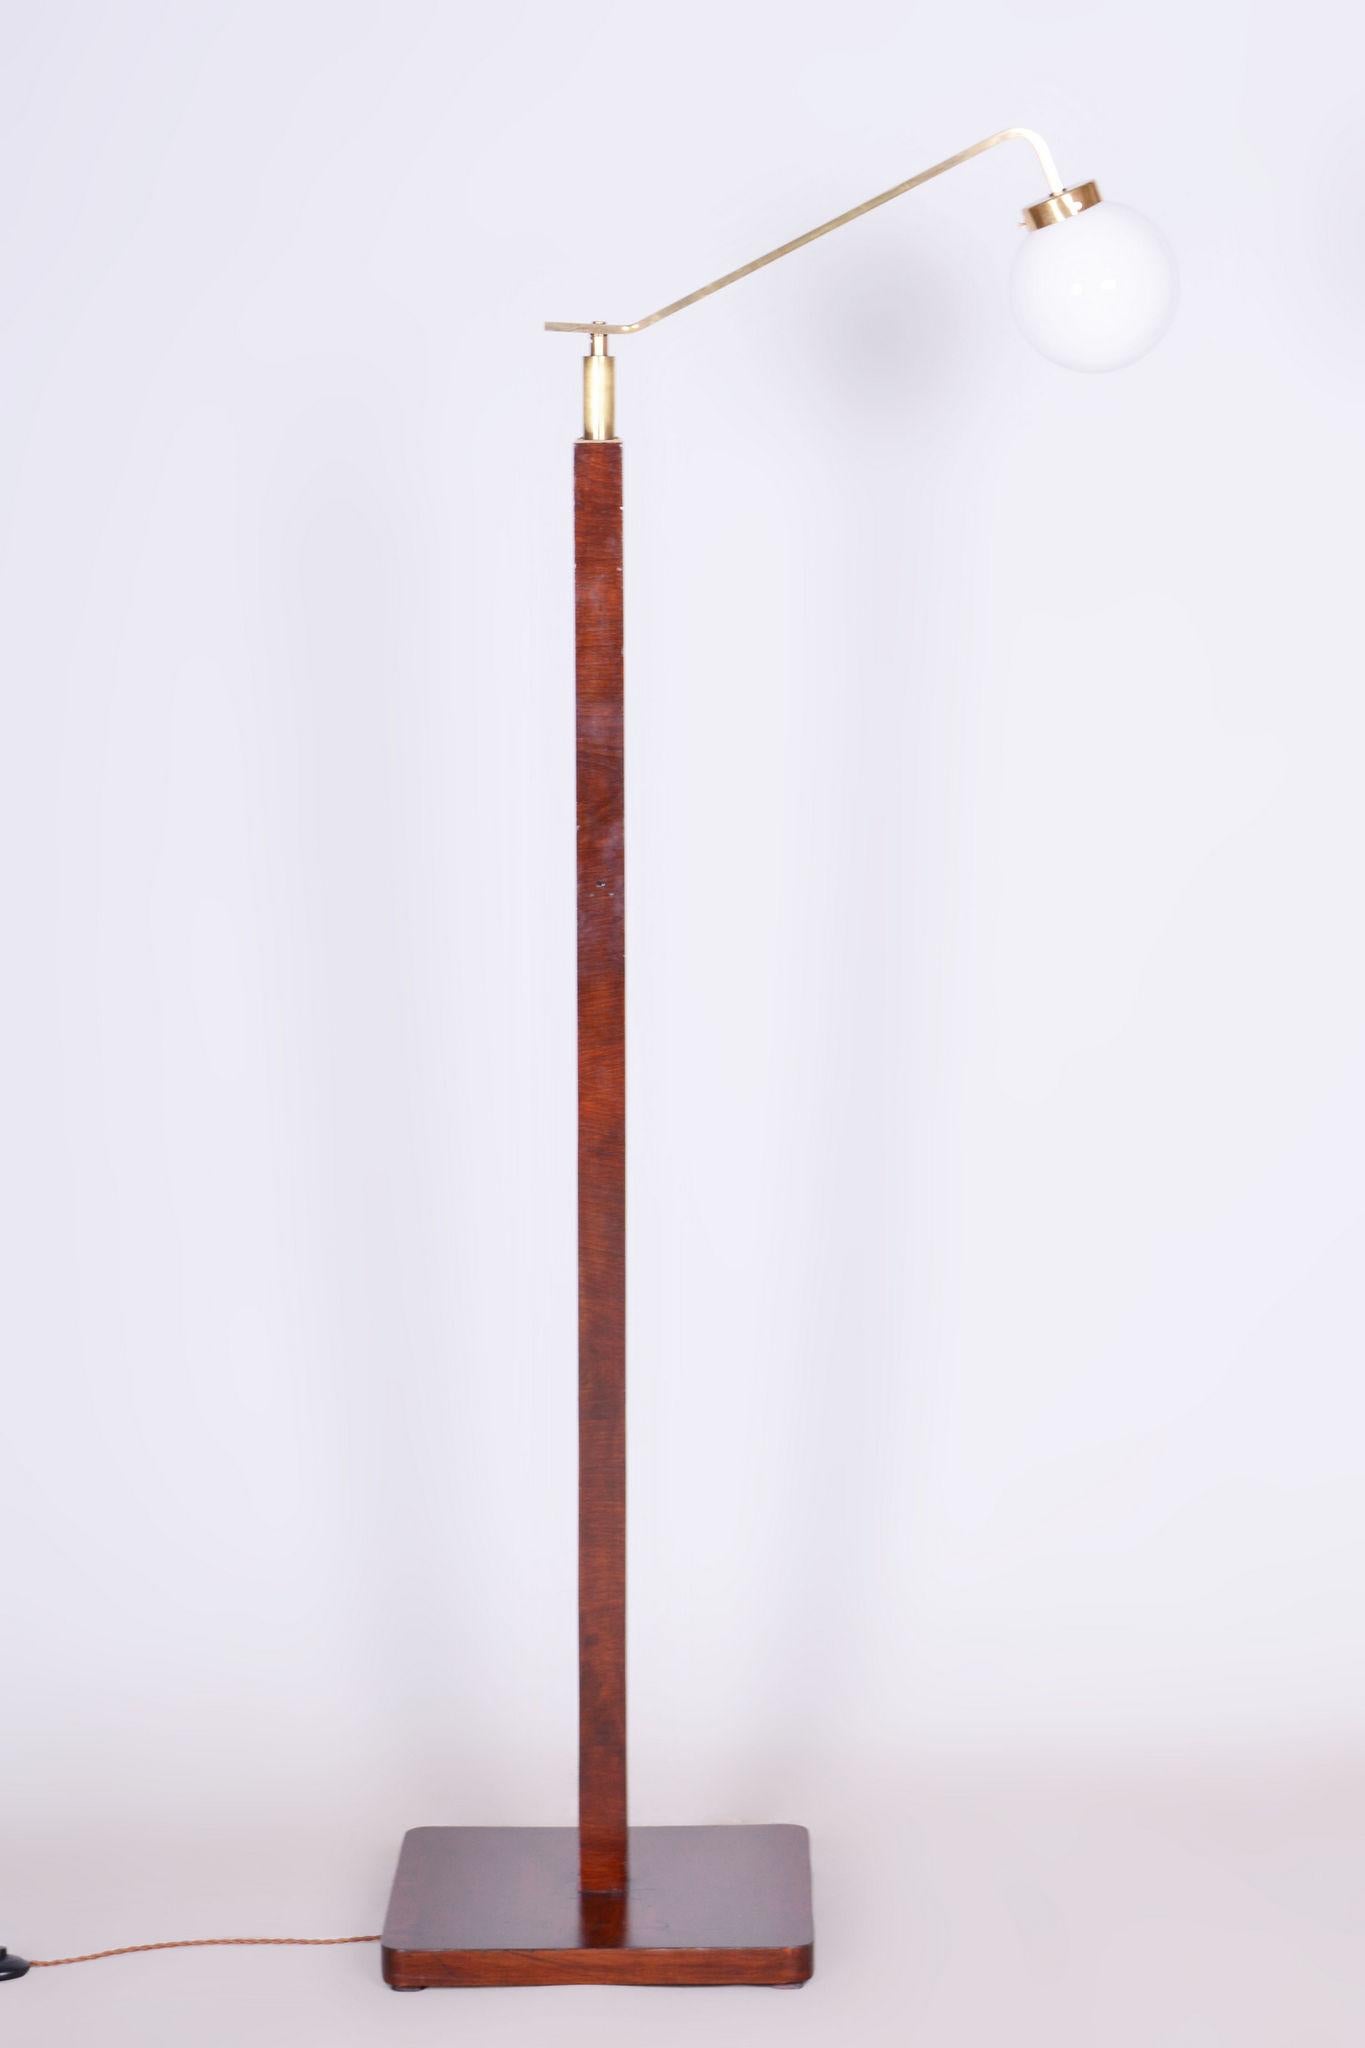 Restored Art Deco floor lamp 

Origin: Czech
Period: 1930-1939
Material: Walnut, Brass, Milk glass, Polish

It has been re-polished with polyutherane piano lacquer by our professional refurbishing team in Czechia according to the original